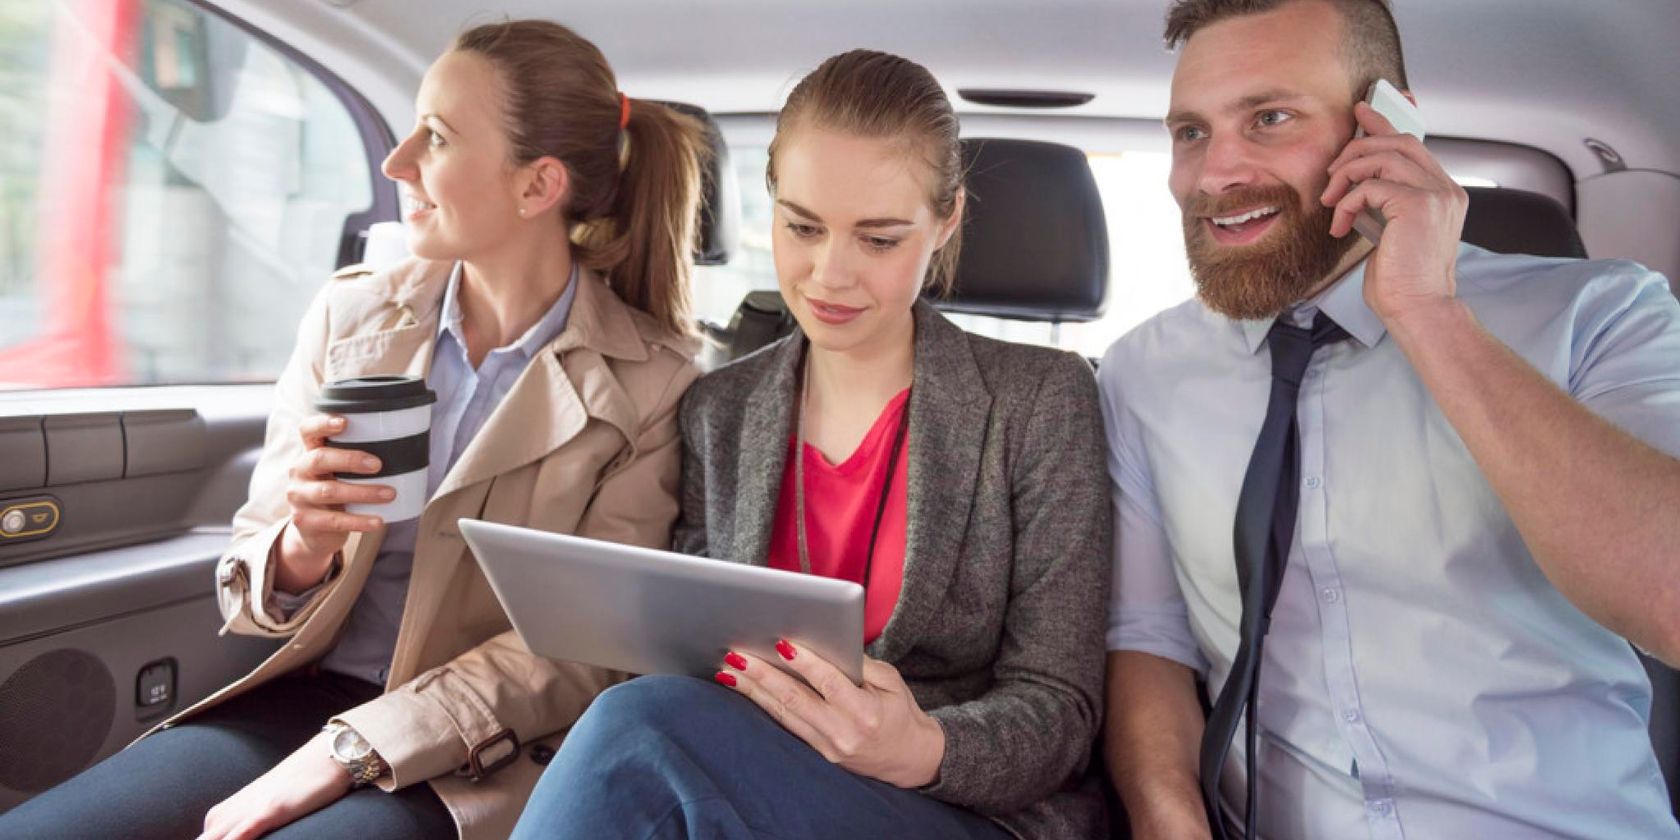 Car passengers using Wi-Fi internet for voice calls and surfing